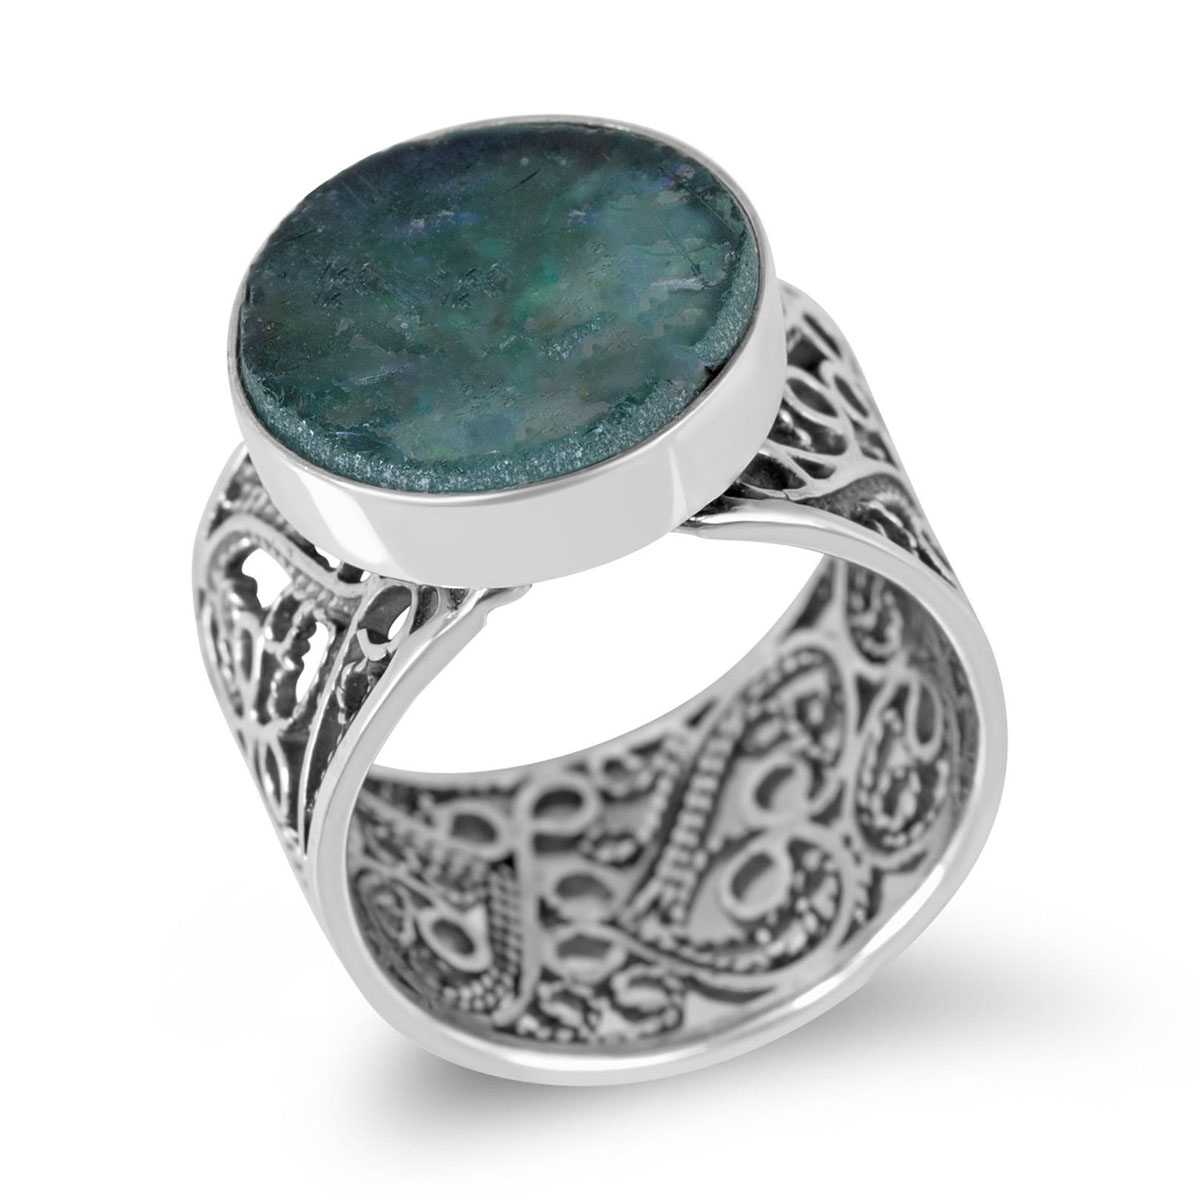 Sterling Silver Antique Roman Glass Filigree Ring - 2